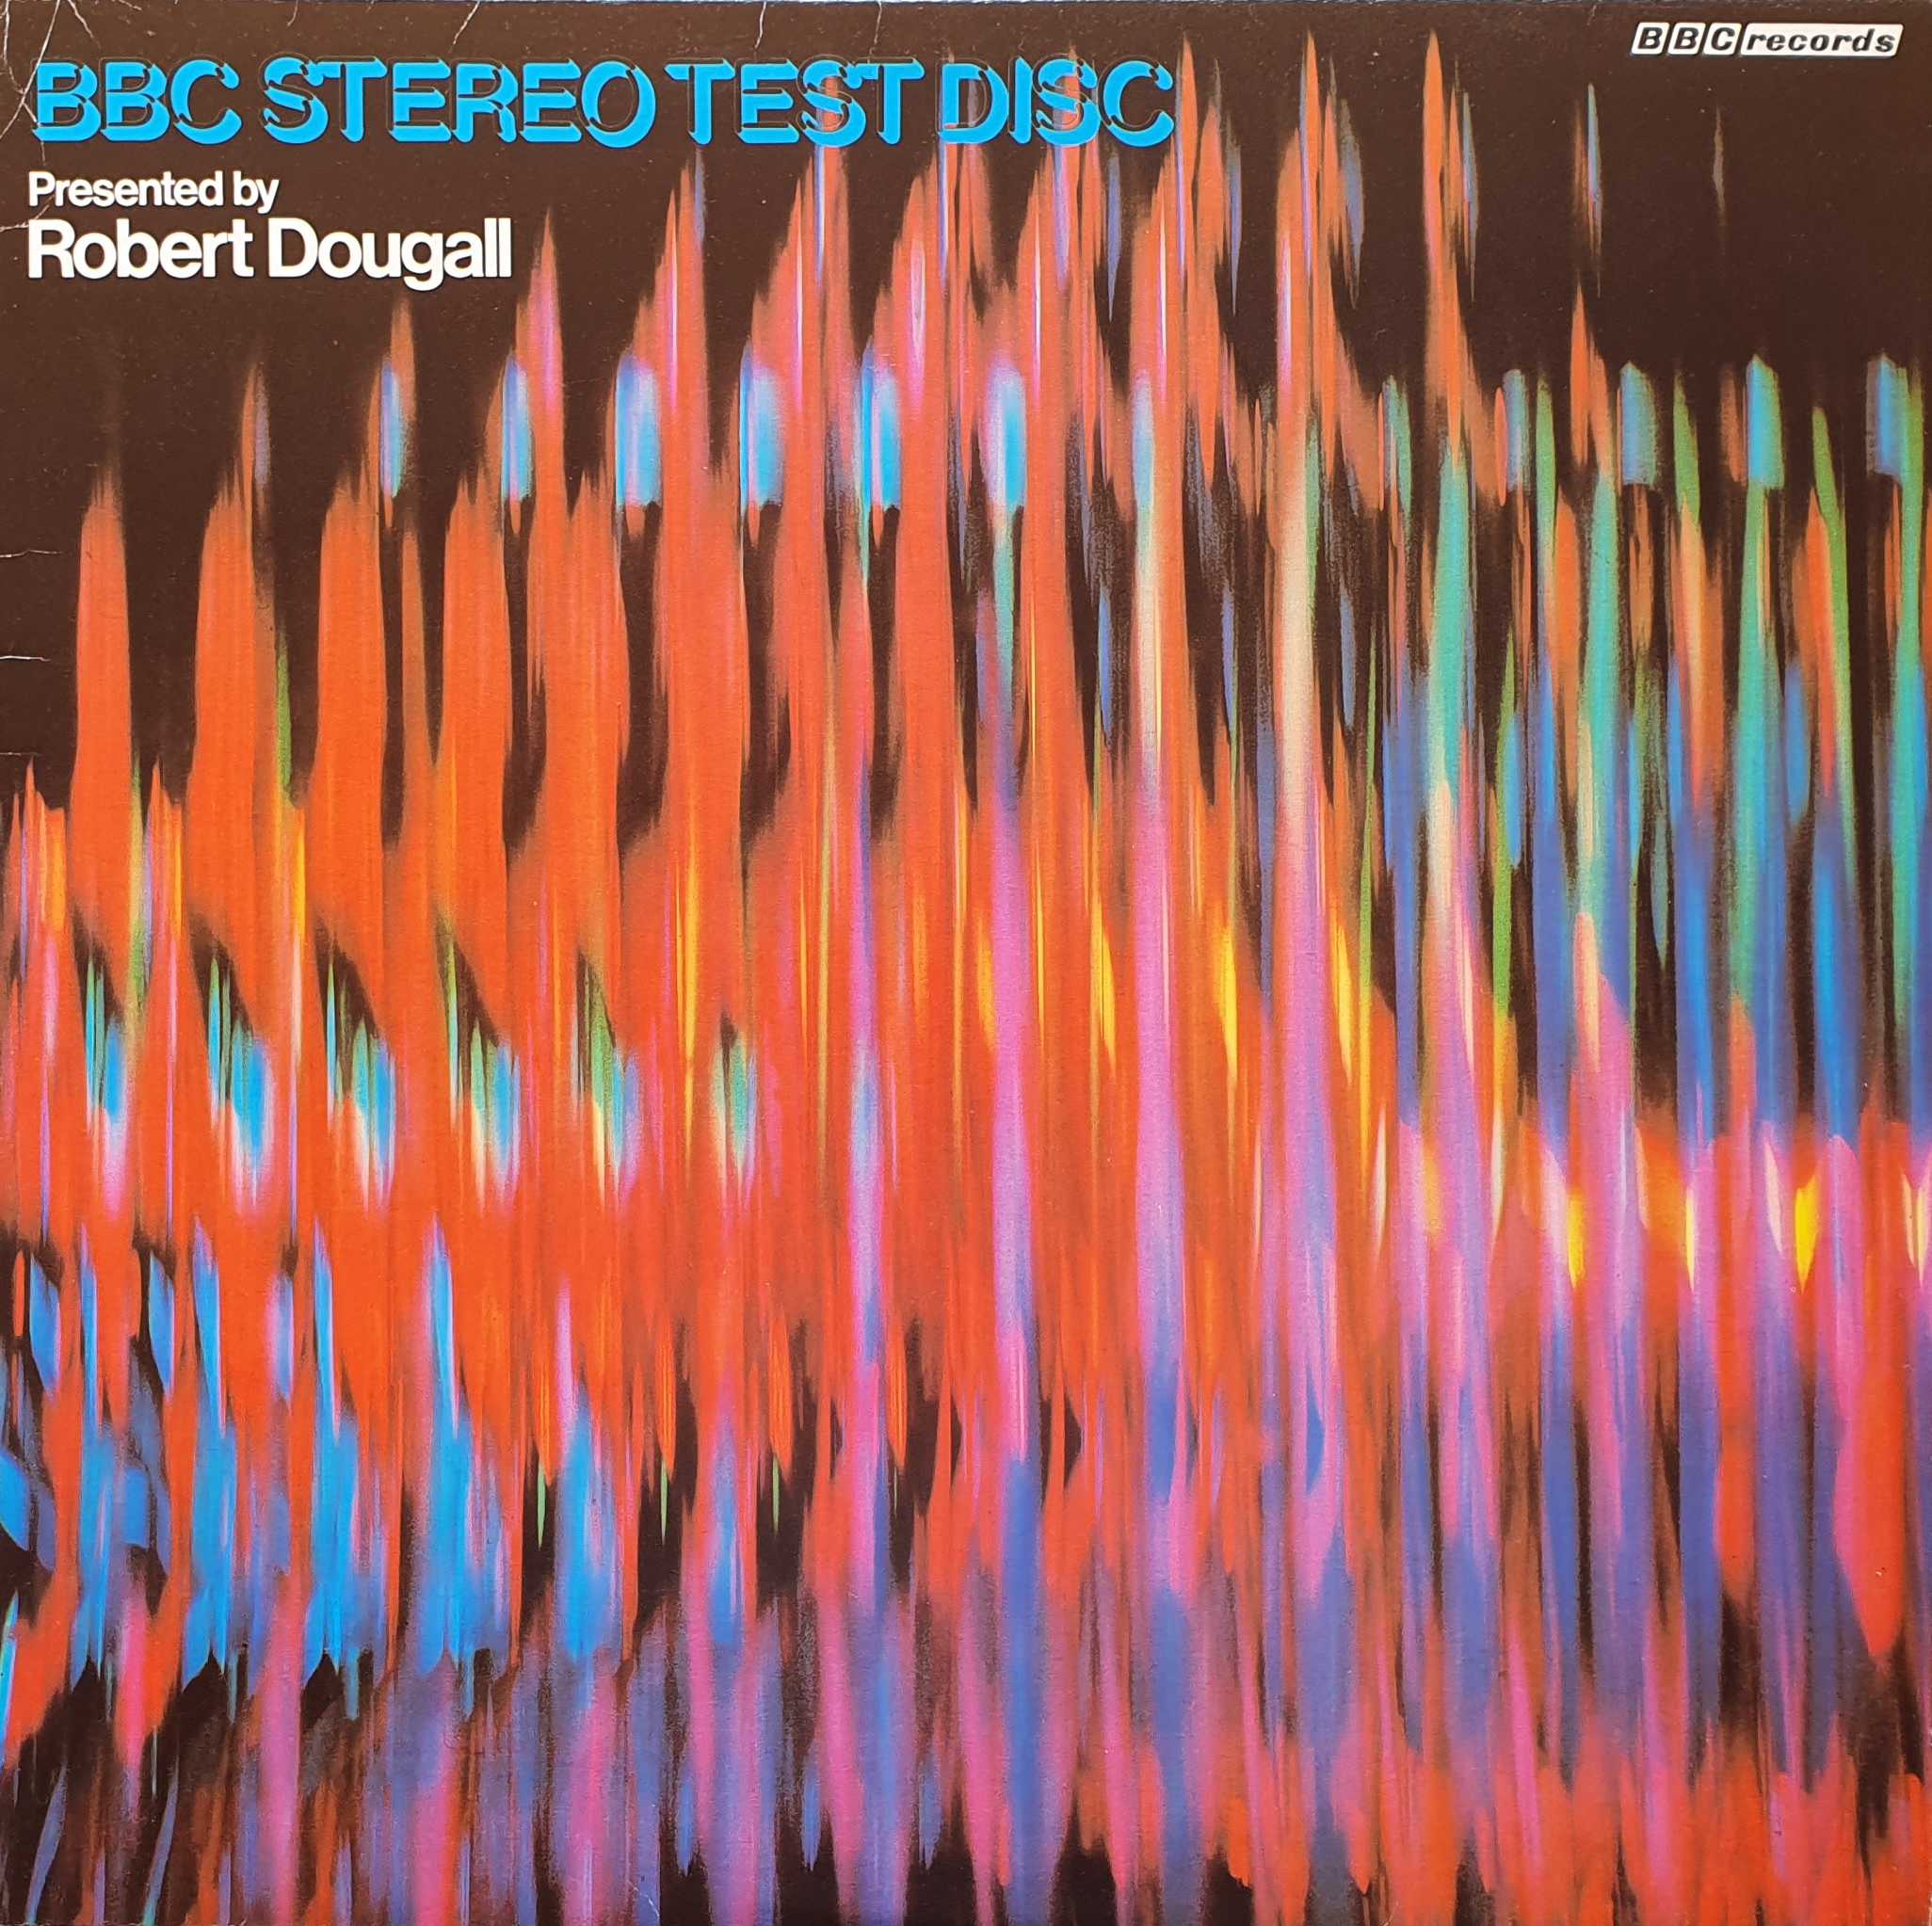 Picture of TRC - 1041 BBC stereo test disc (Canadian import) by artist Robert Dougall from the BBC albums - Records and Tapes library